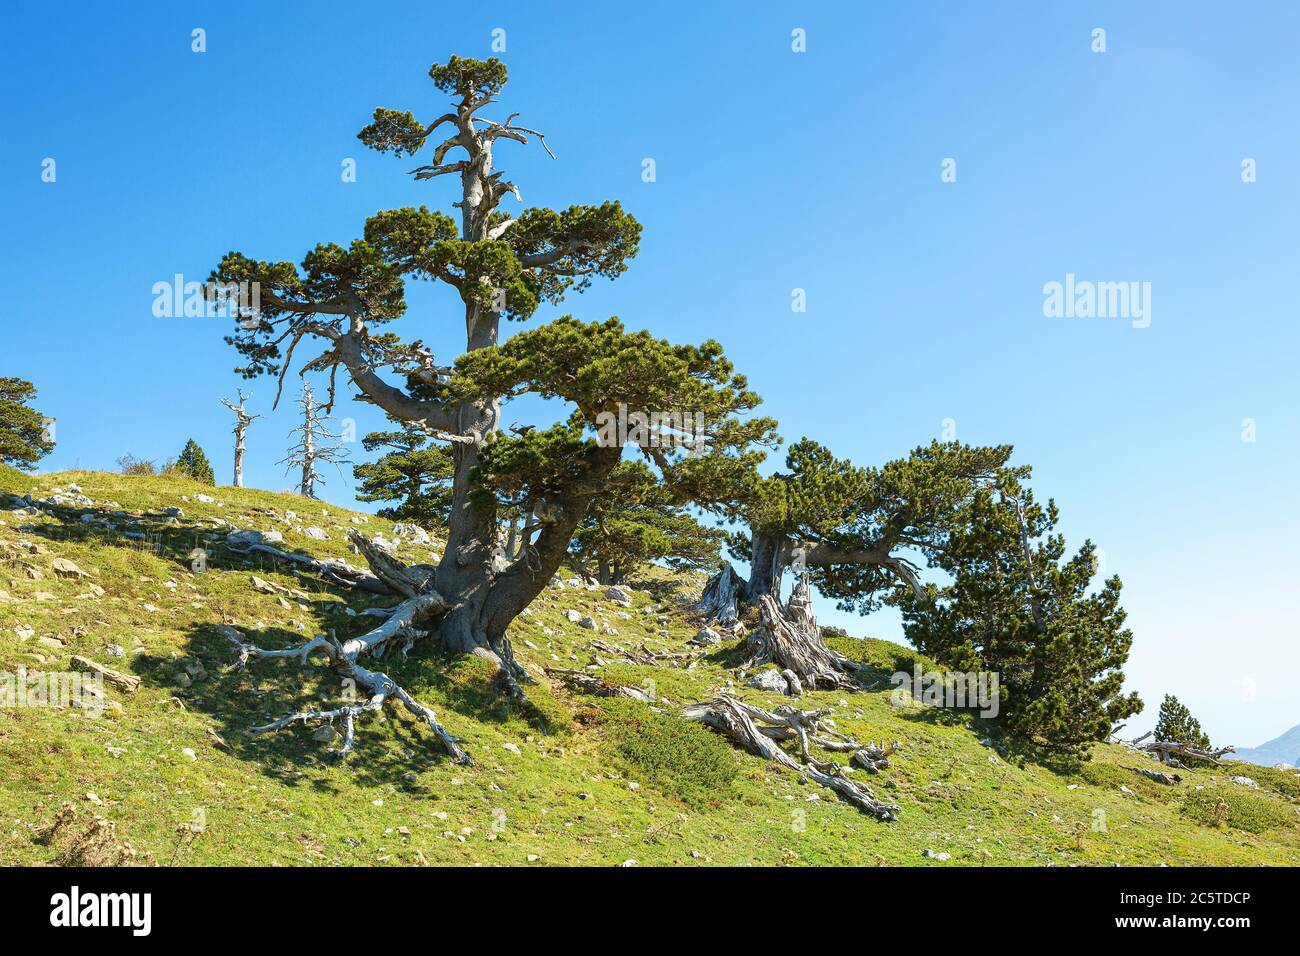 Bosnian pines on top of Serra di Crispo mountain, which is also known as the “Garden of Gods”,  Pollino National Park, southern Italy. Stock Photo